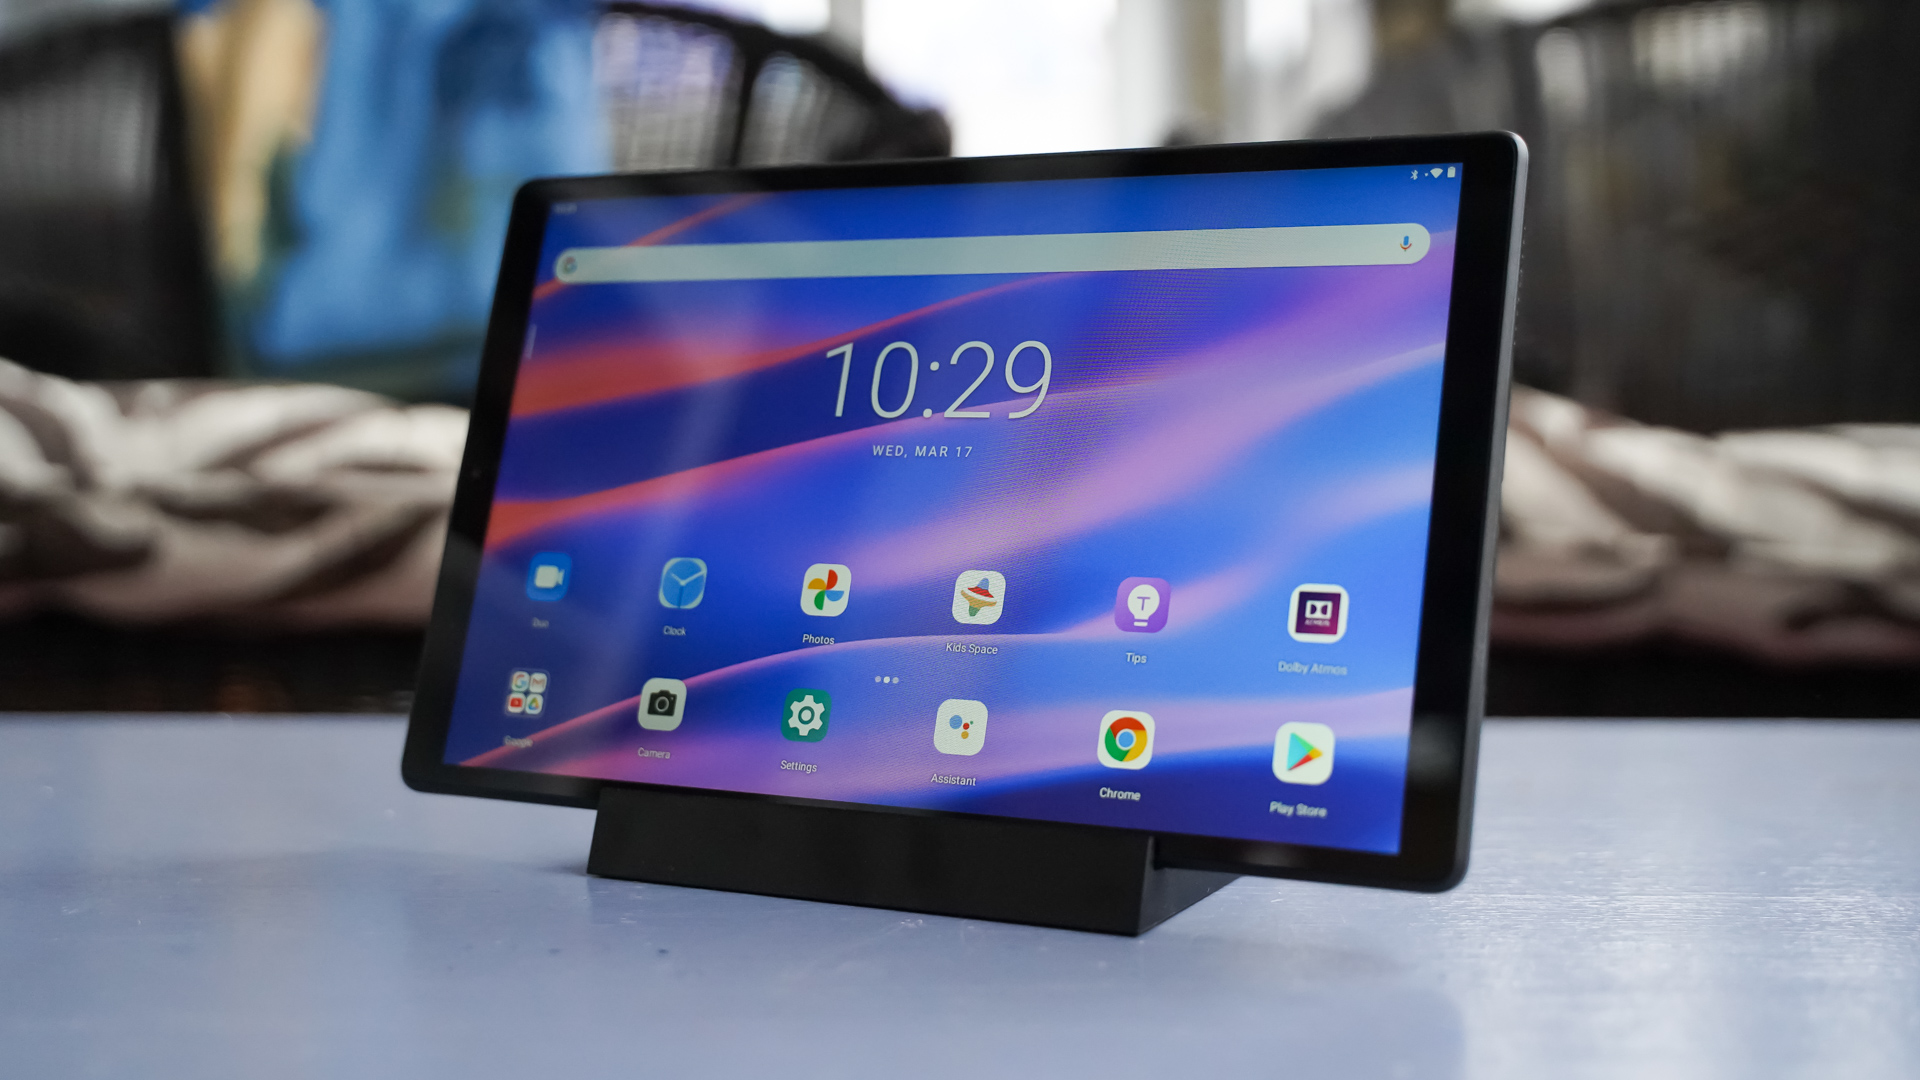 https://www.androidauthority.com/lenovo-smart-tab-m10-hd-review-120895/